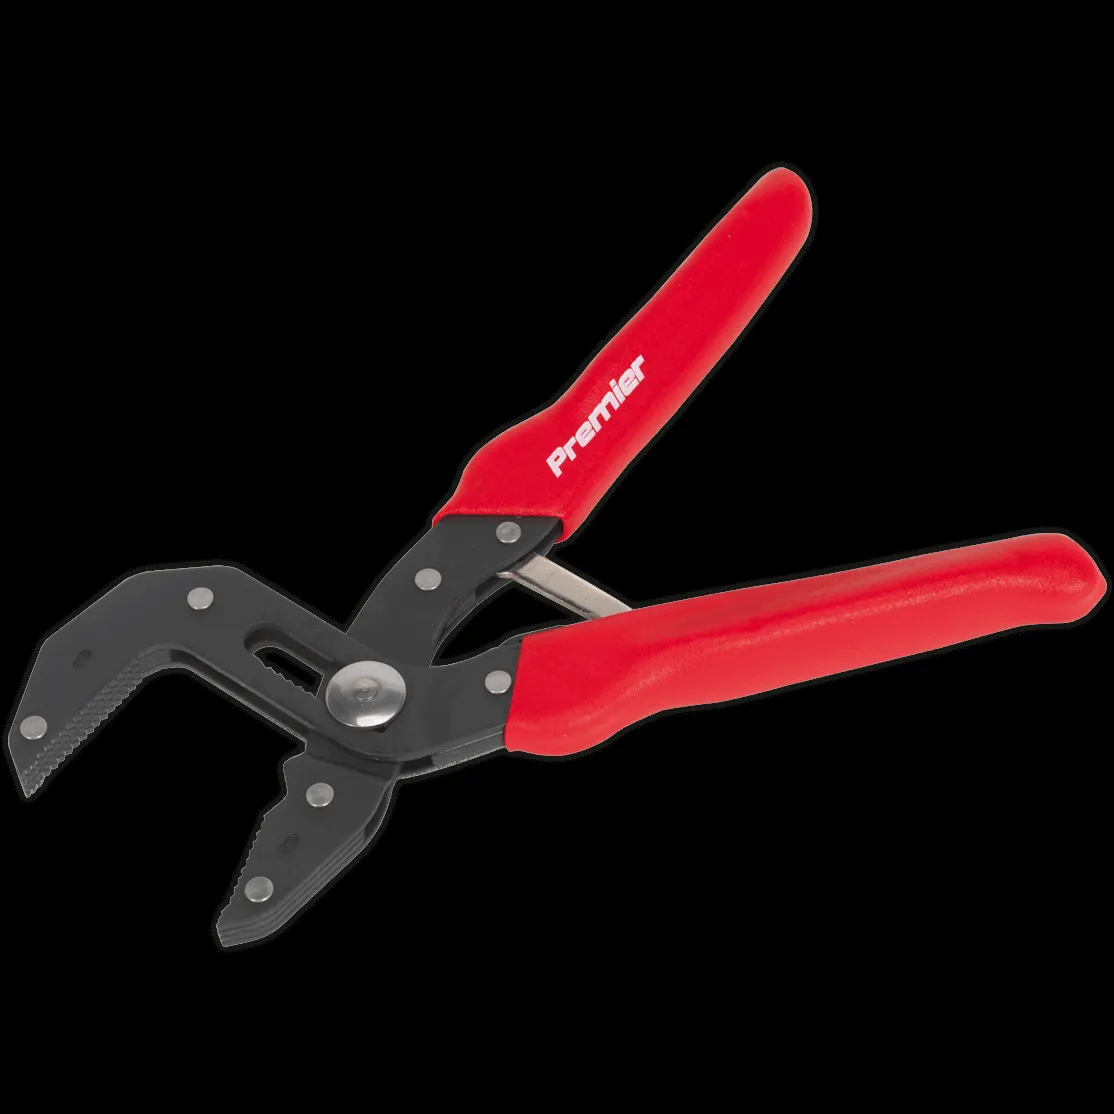 Sealey Self Adjusting One Hand Slip Joint Pliers - 175mm